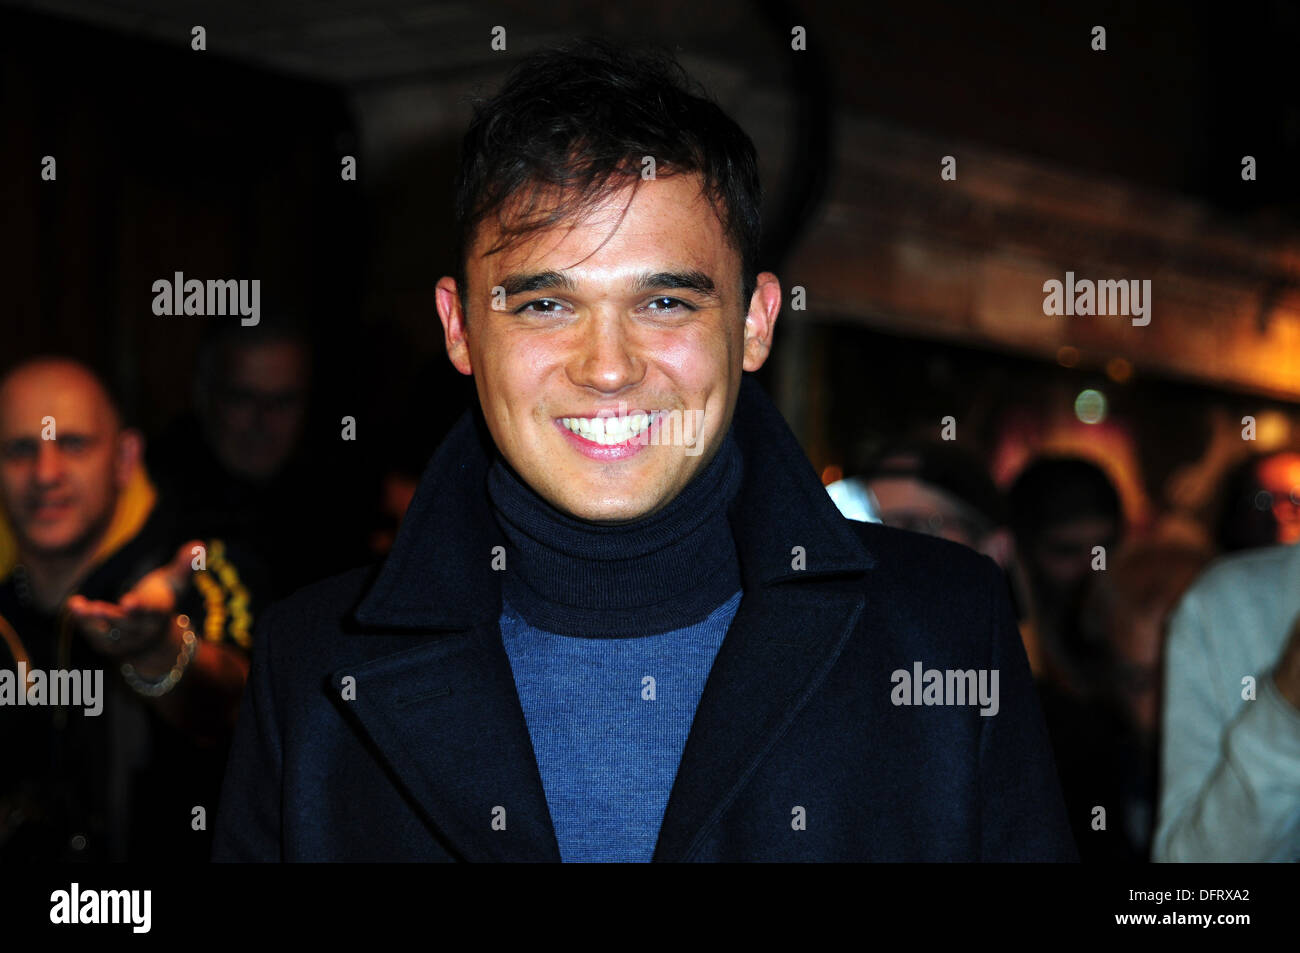 London UK, 8th Oct 2013; Lee attends the World Premiere The Commitments UK at Theatre Play in London. See Li / Alamy, Live News Stock Photo